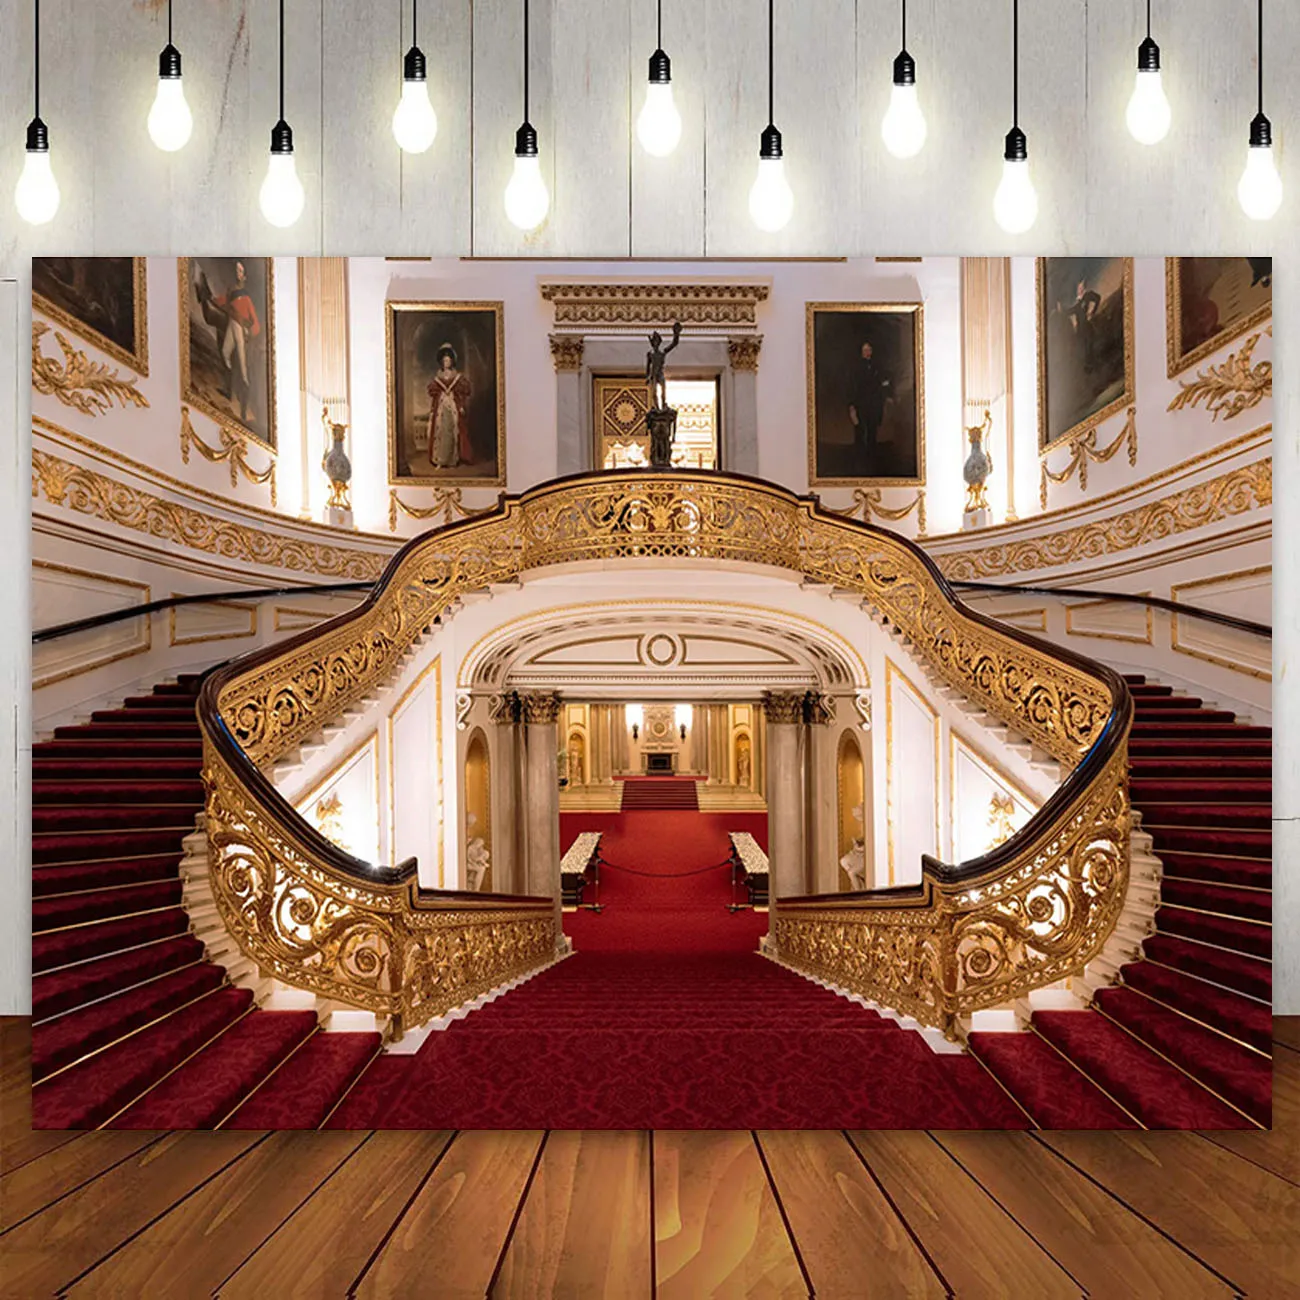 

Palace Stairs Red Carpet Backdrop Interior Live Video Birthday Party Banner Decor Portrait Wedding Bridal Photography Background